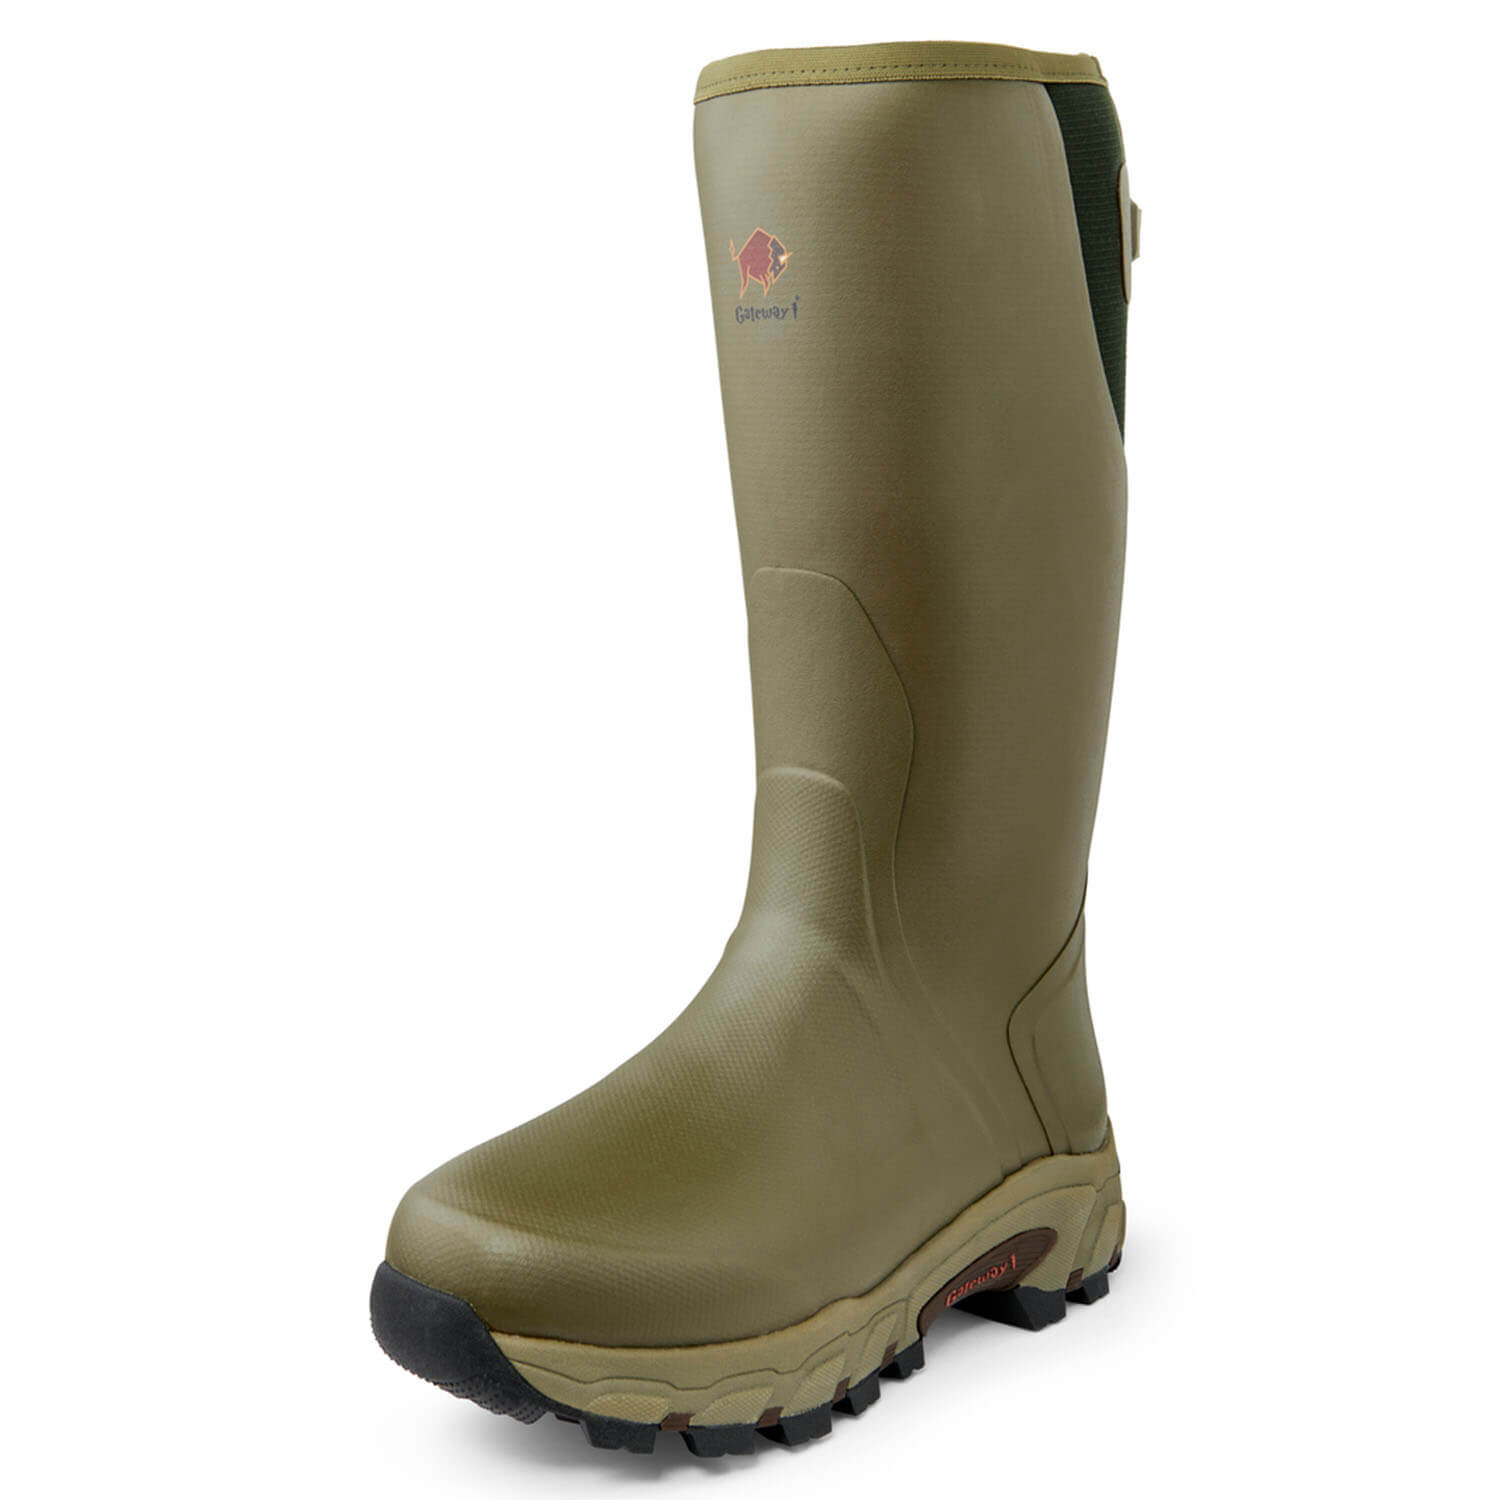 Gateway1 Rubber Boots Pro Shooter18 7mm (green - Hunting Boots